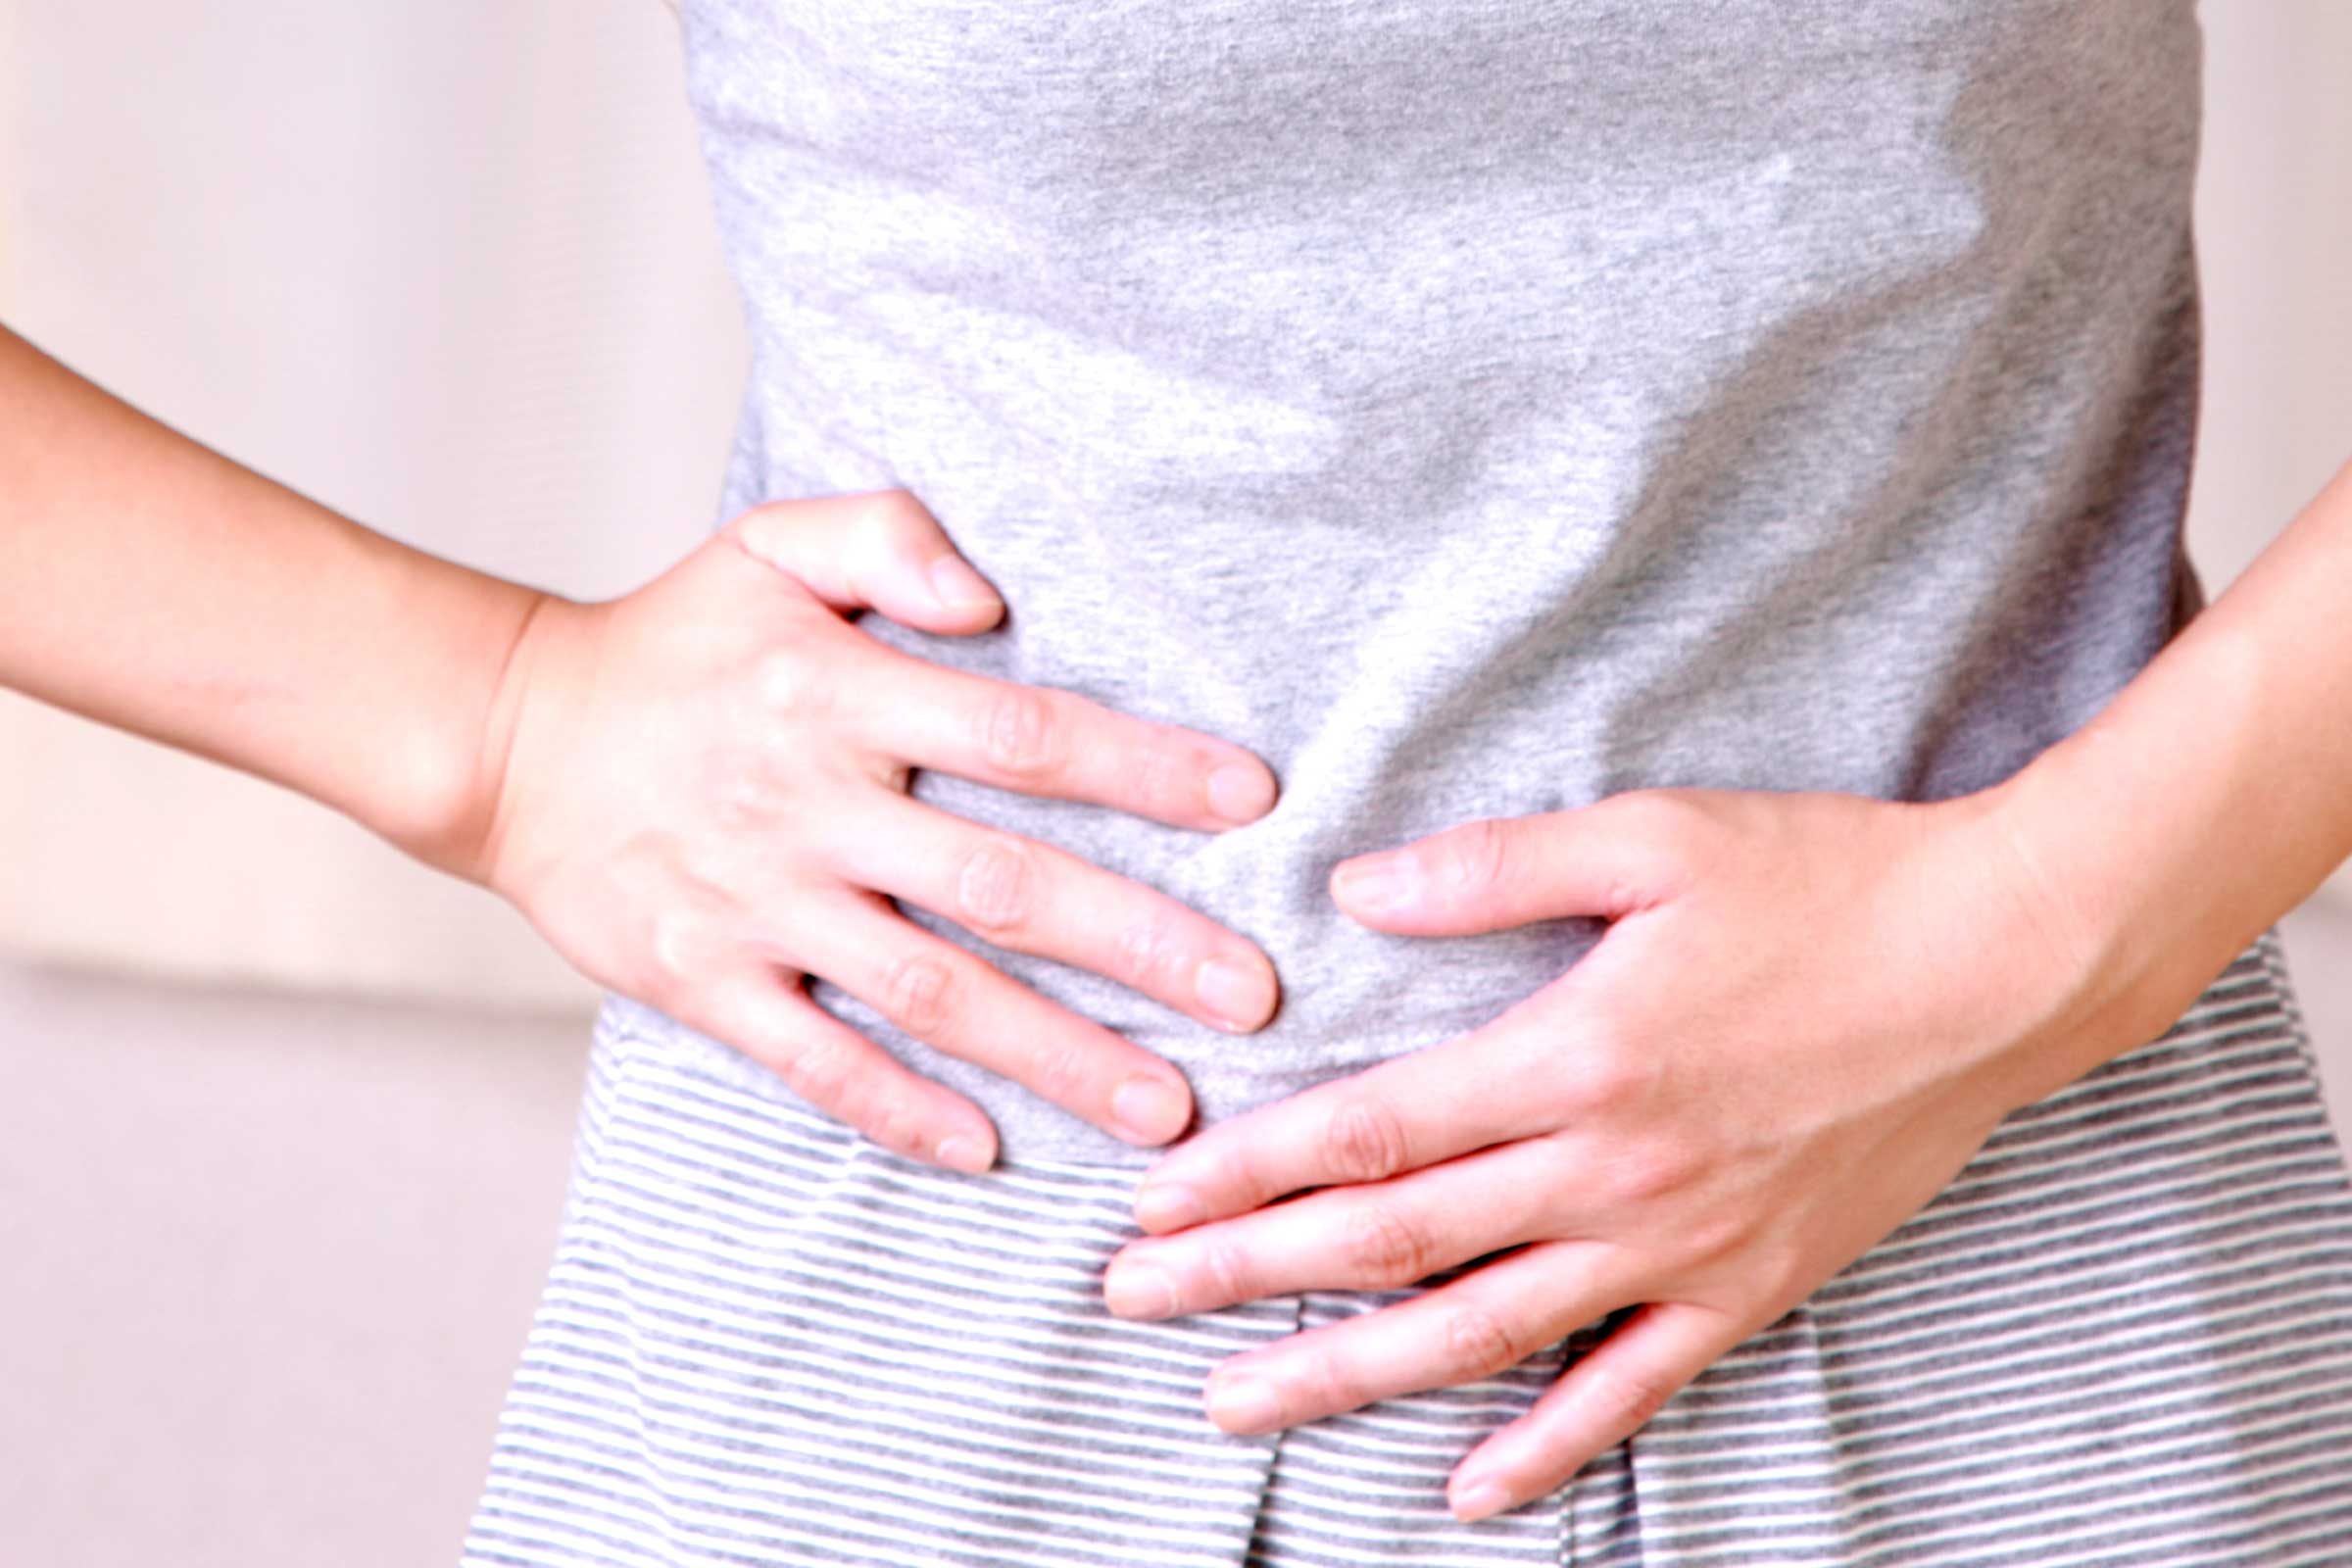 Stomach Pain Causes: 7 Reasons for Abdominal Pain